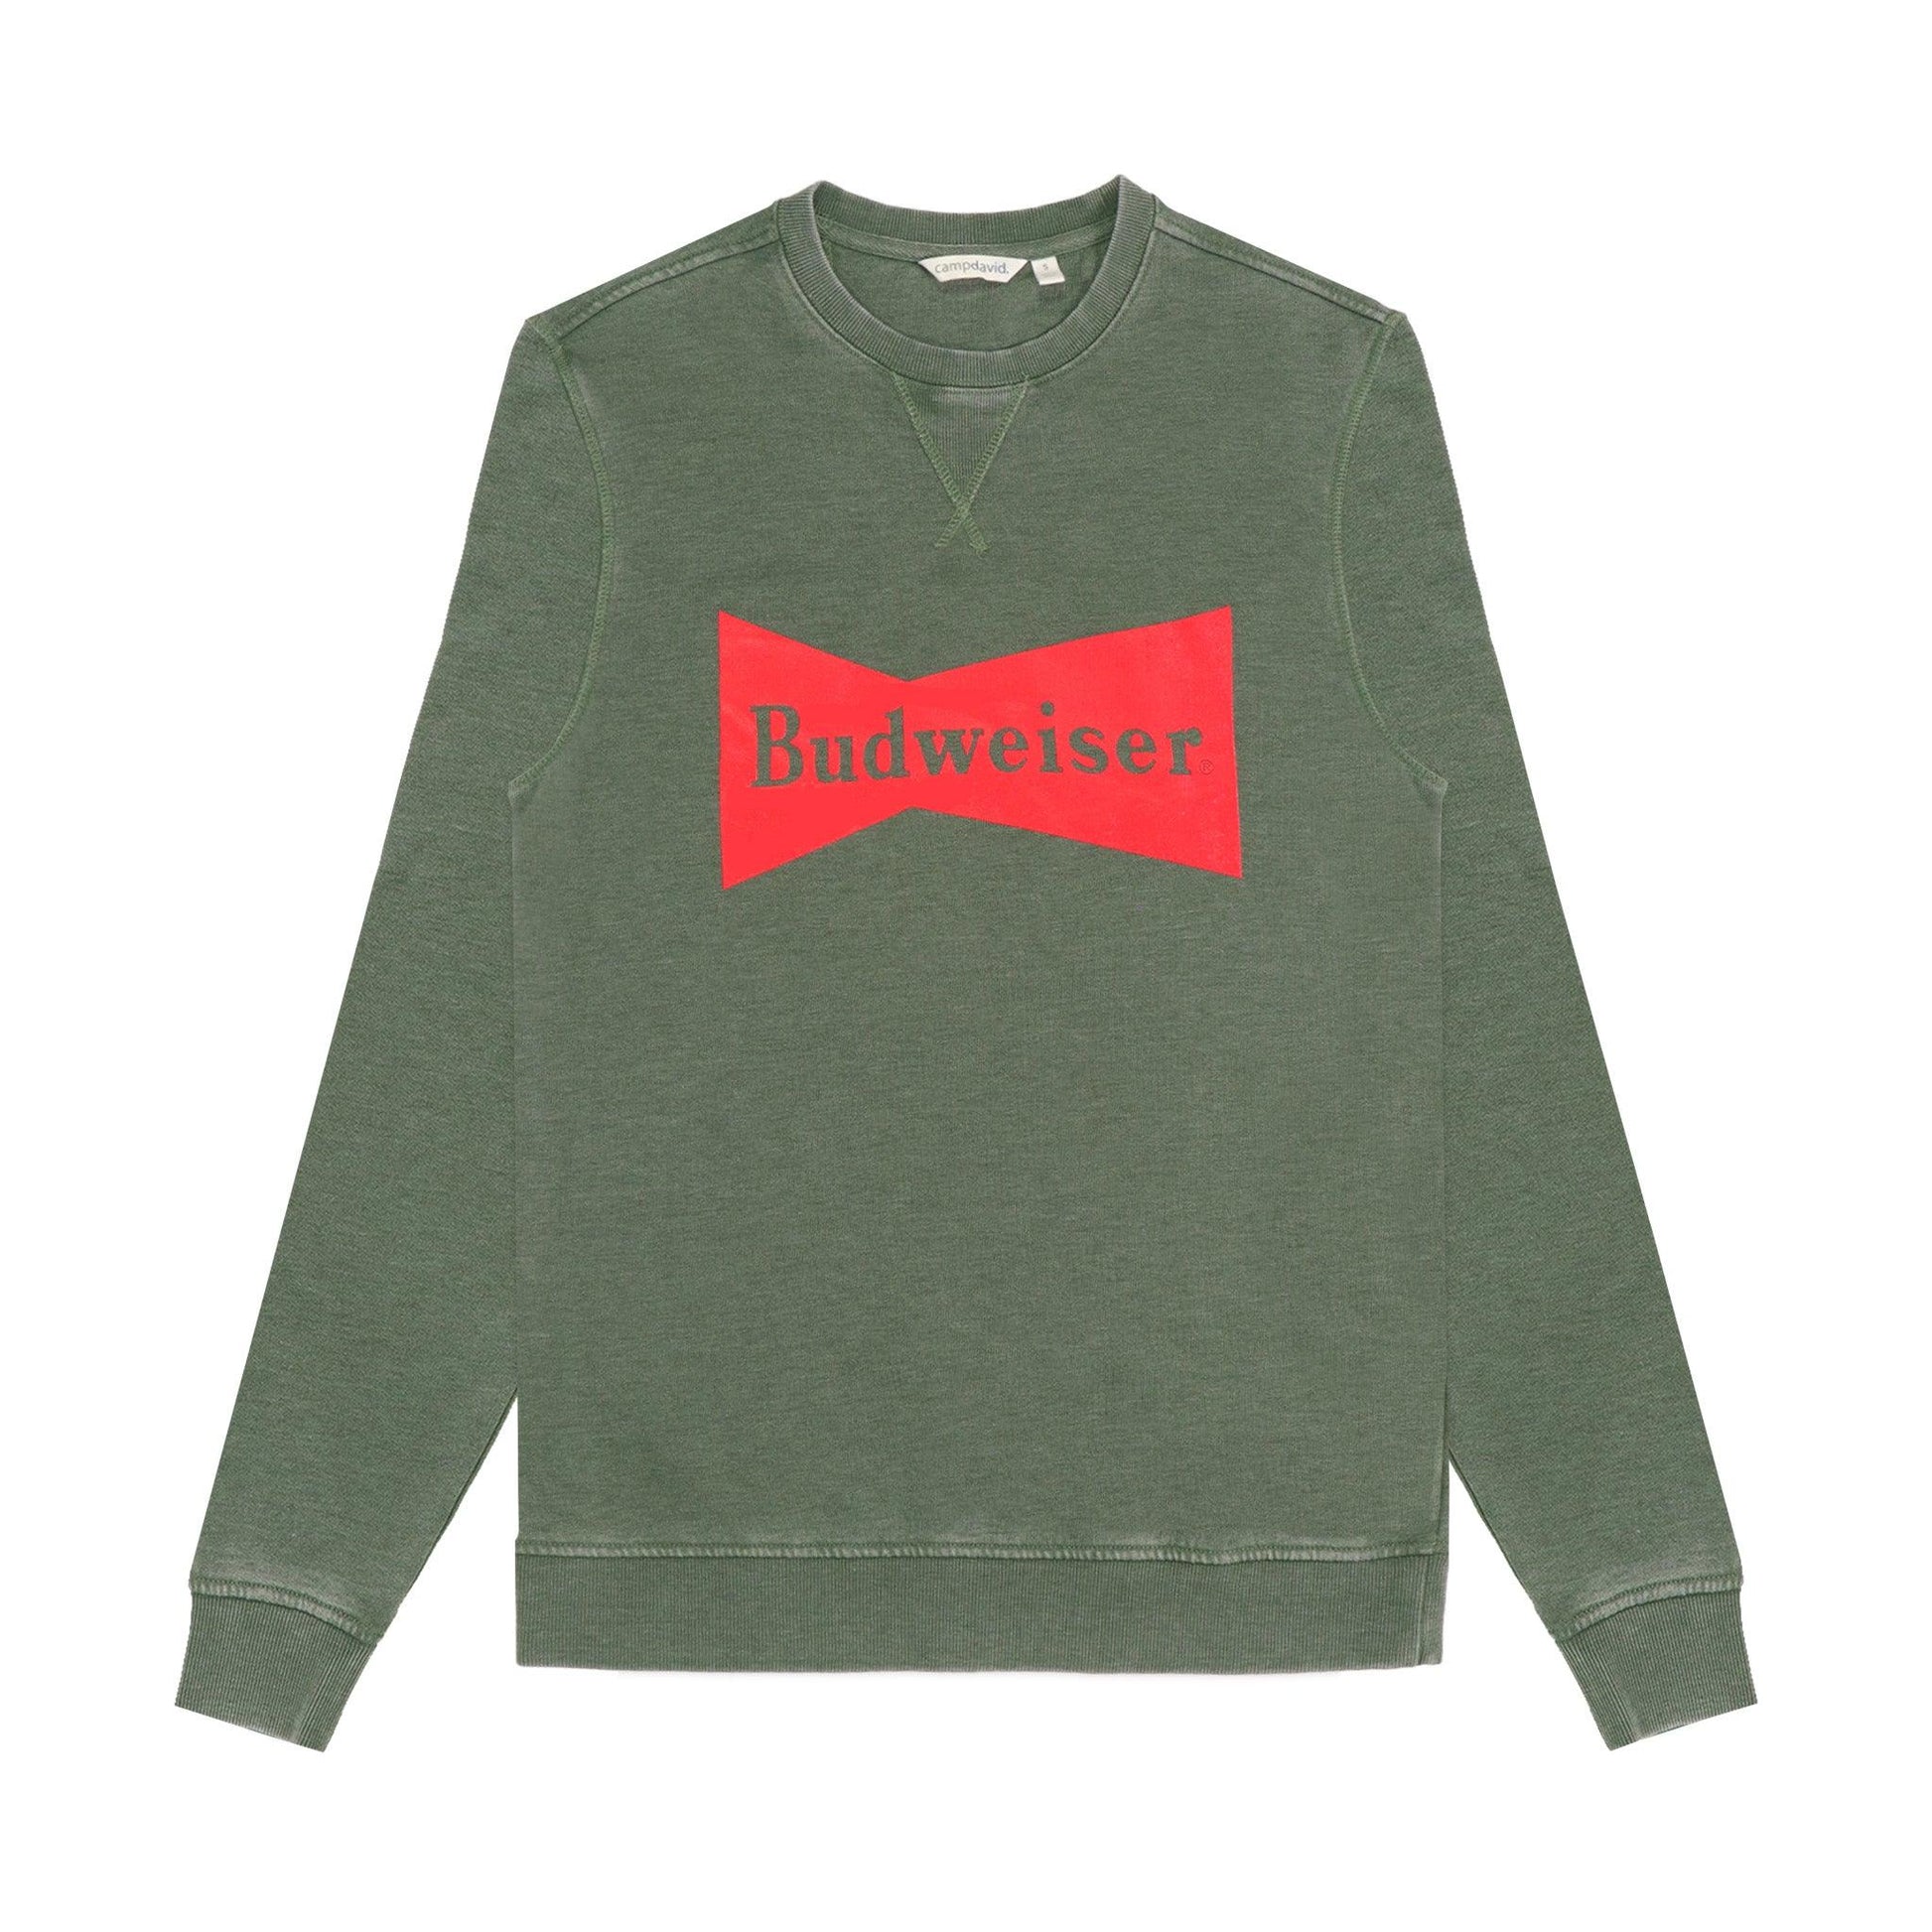 green crewneck sweatshirt which features the budweiser bowtie on front full chest of sweatshirt